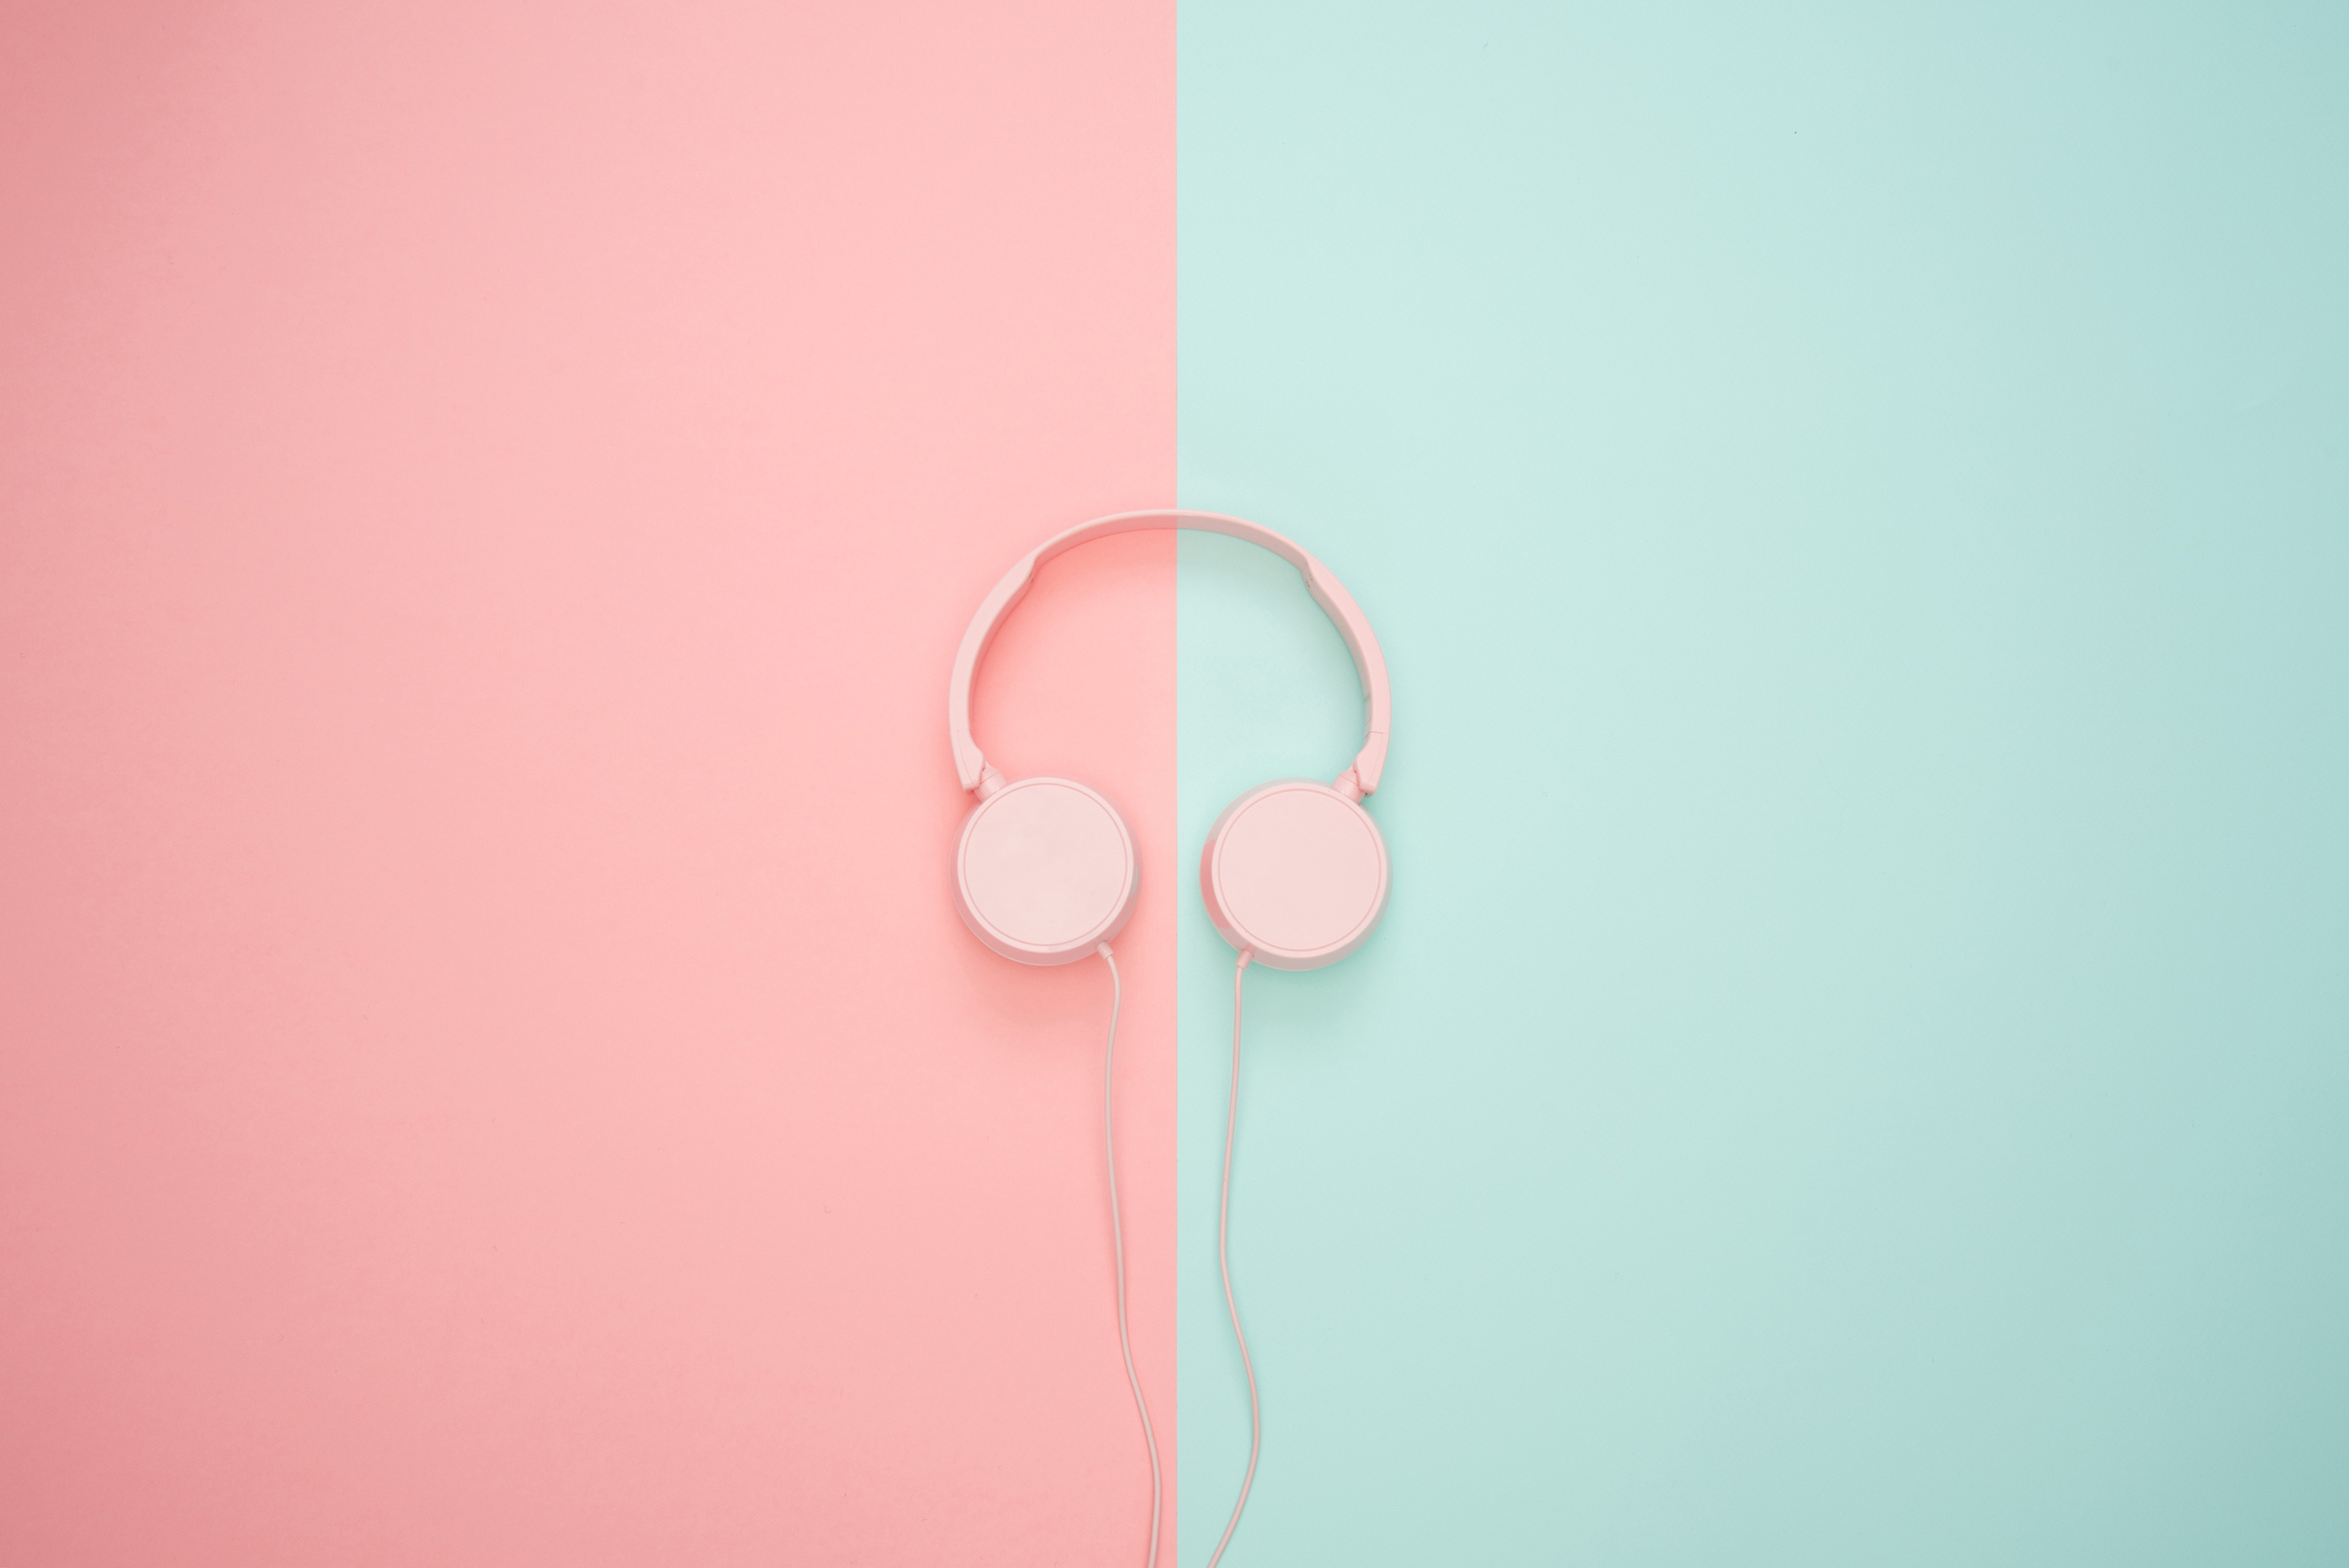 Pink Headphones on a Pastel Background